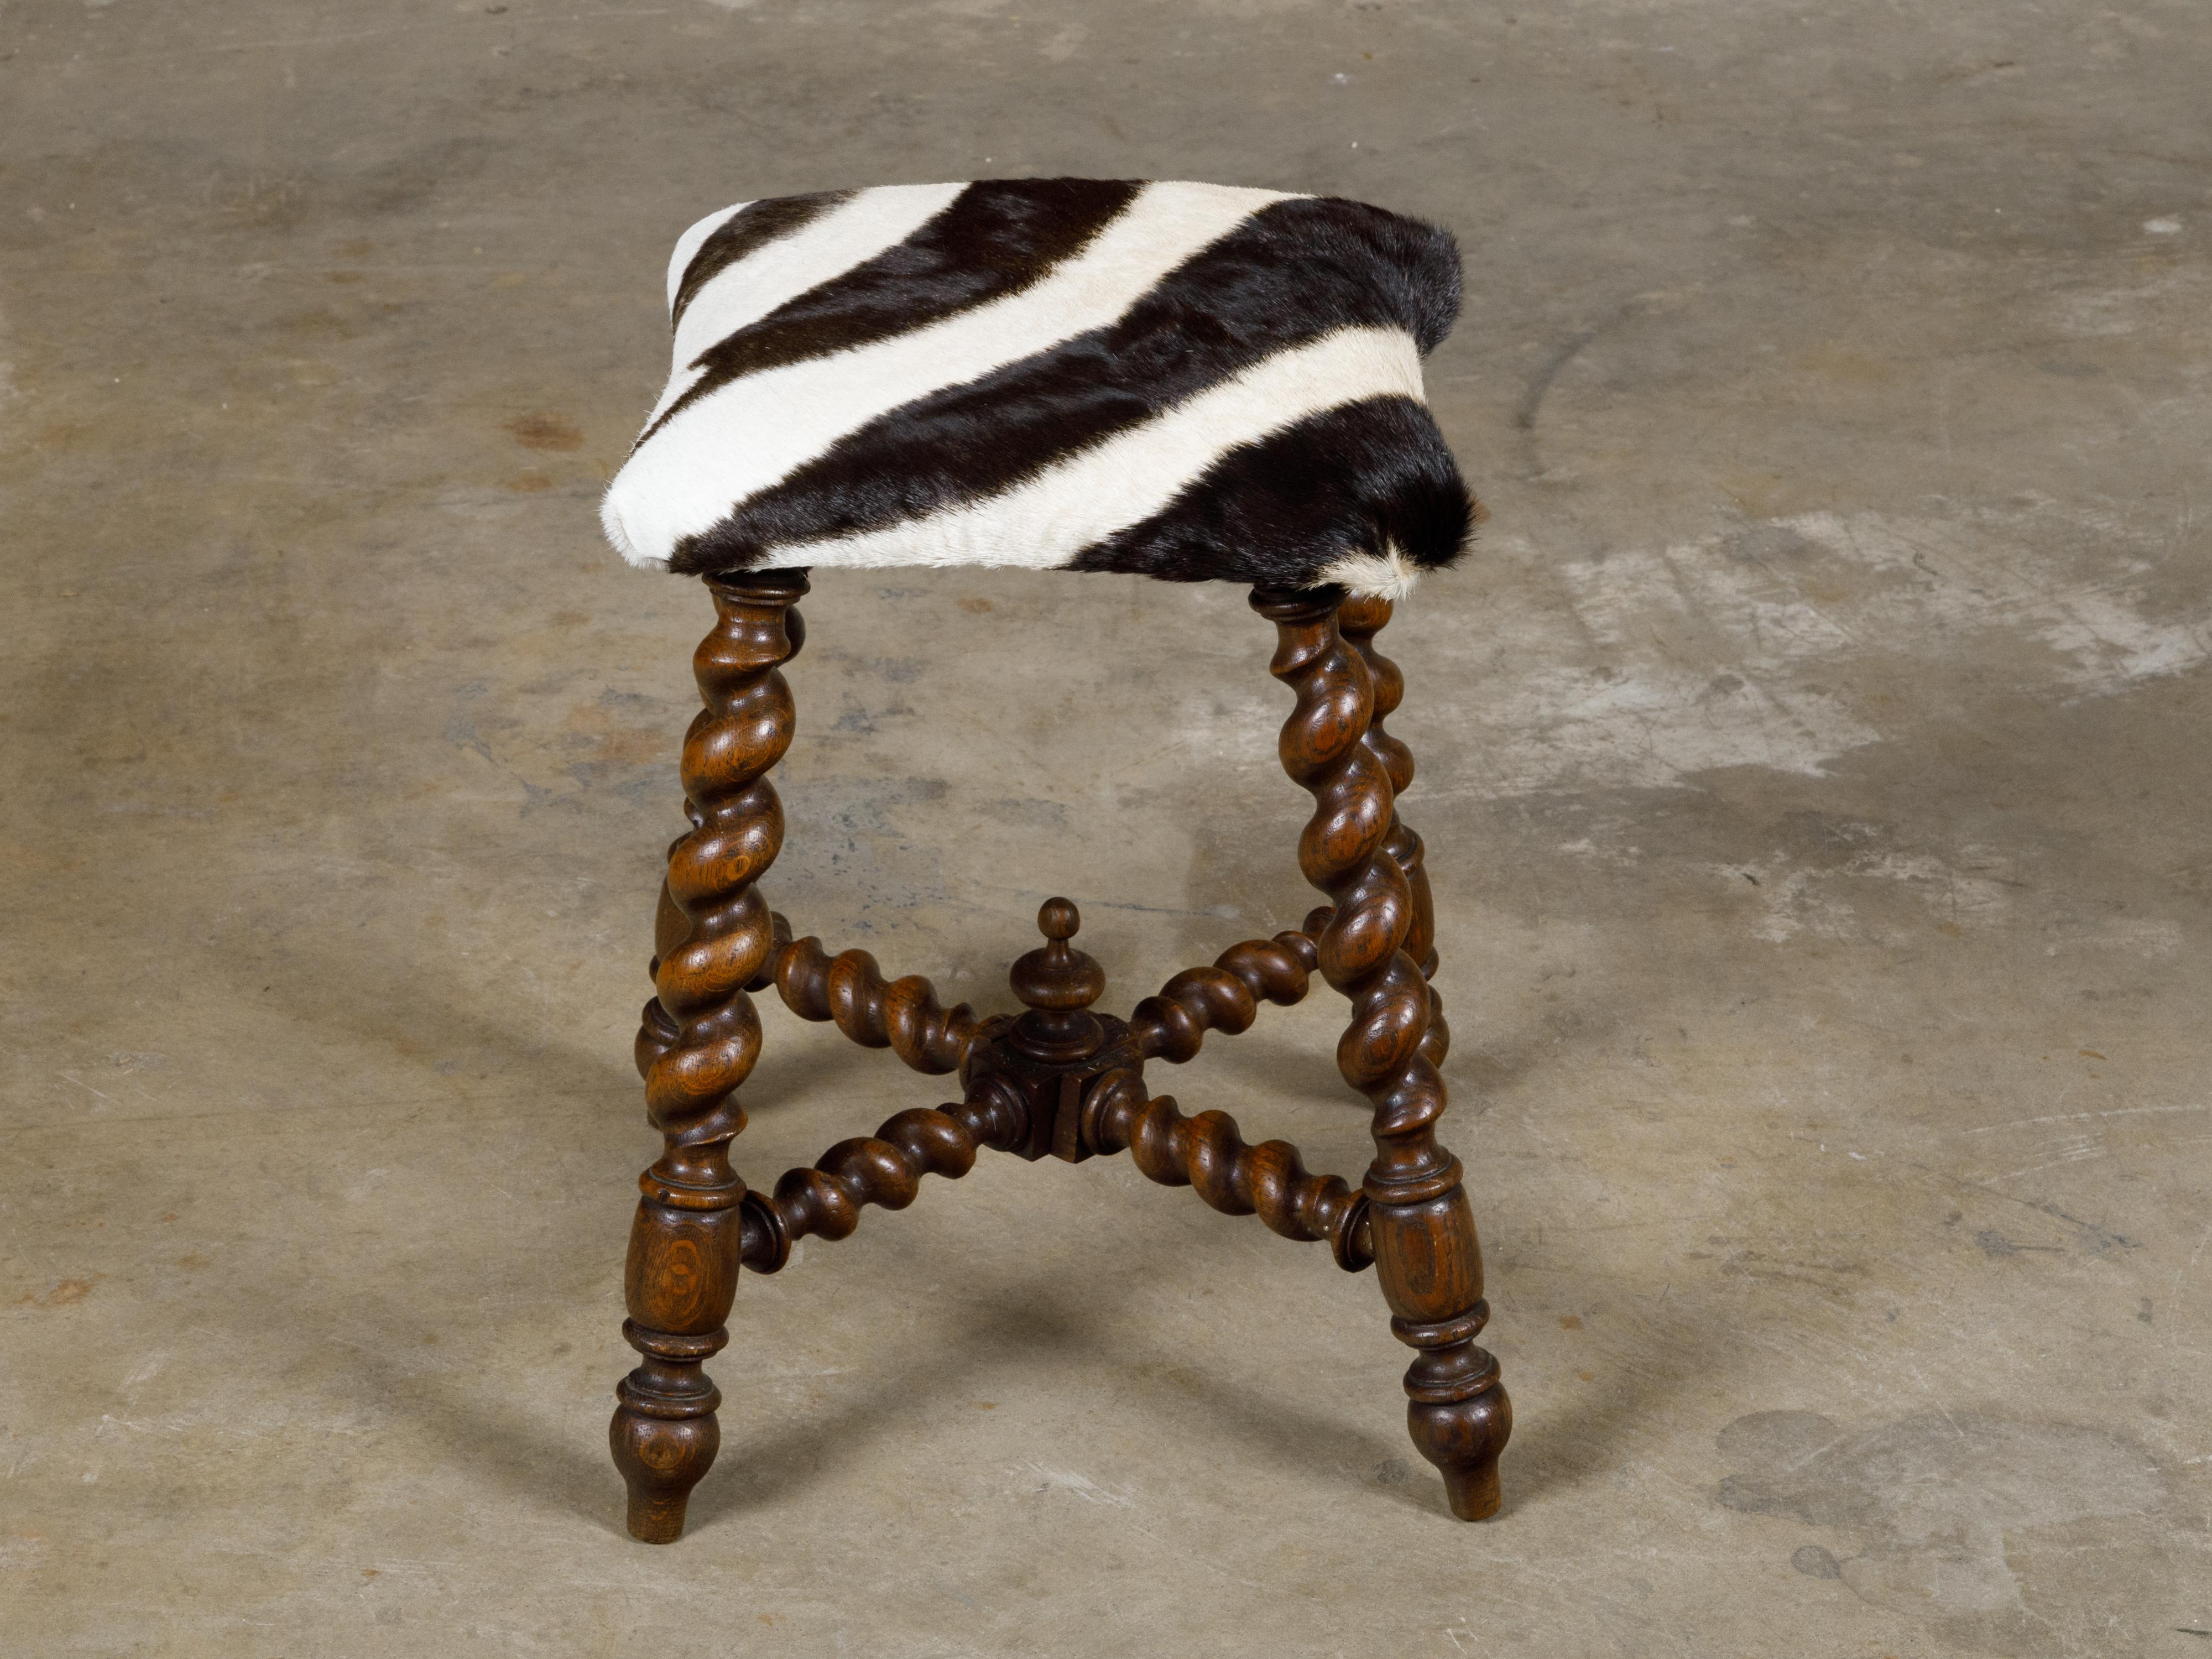 An English Turn of the Century barley twist stool from circa 1900 with zebra hide upholstery and X-Form cross stretcher. Immerse yourself in the unique blend of traditional English craftsmanship and exotic flair with this Turn of the Century barley